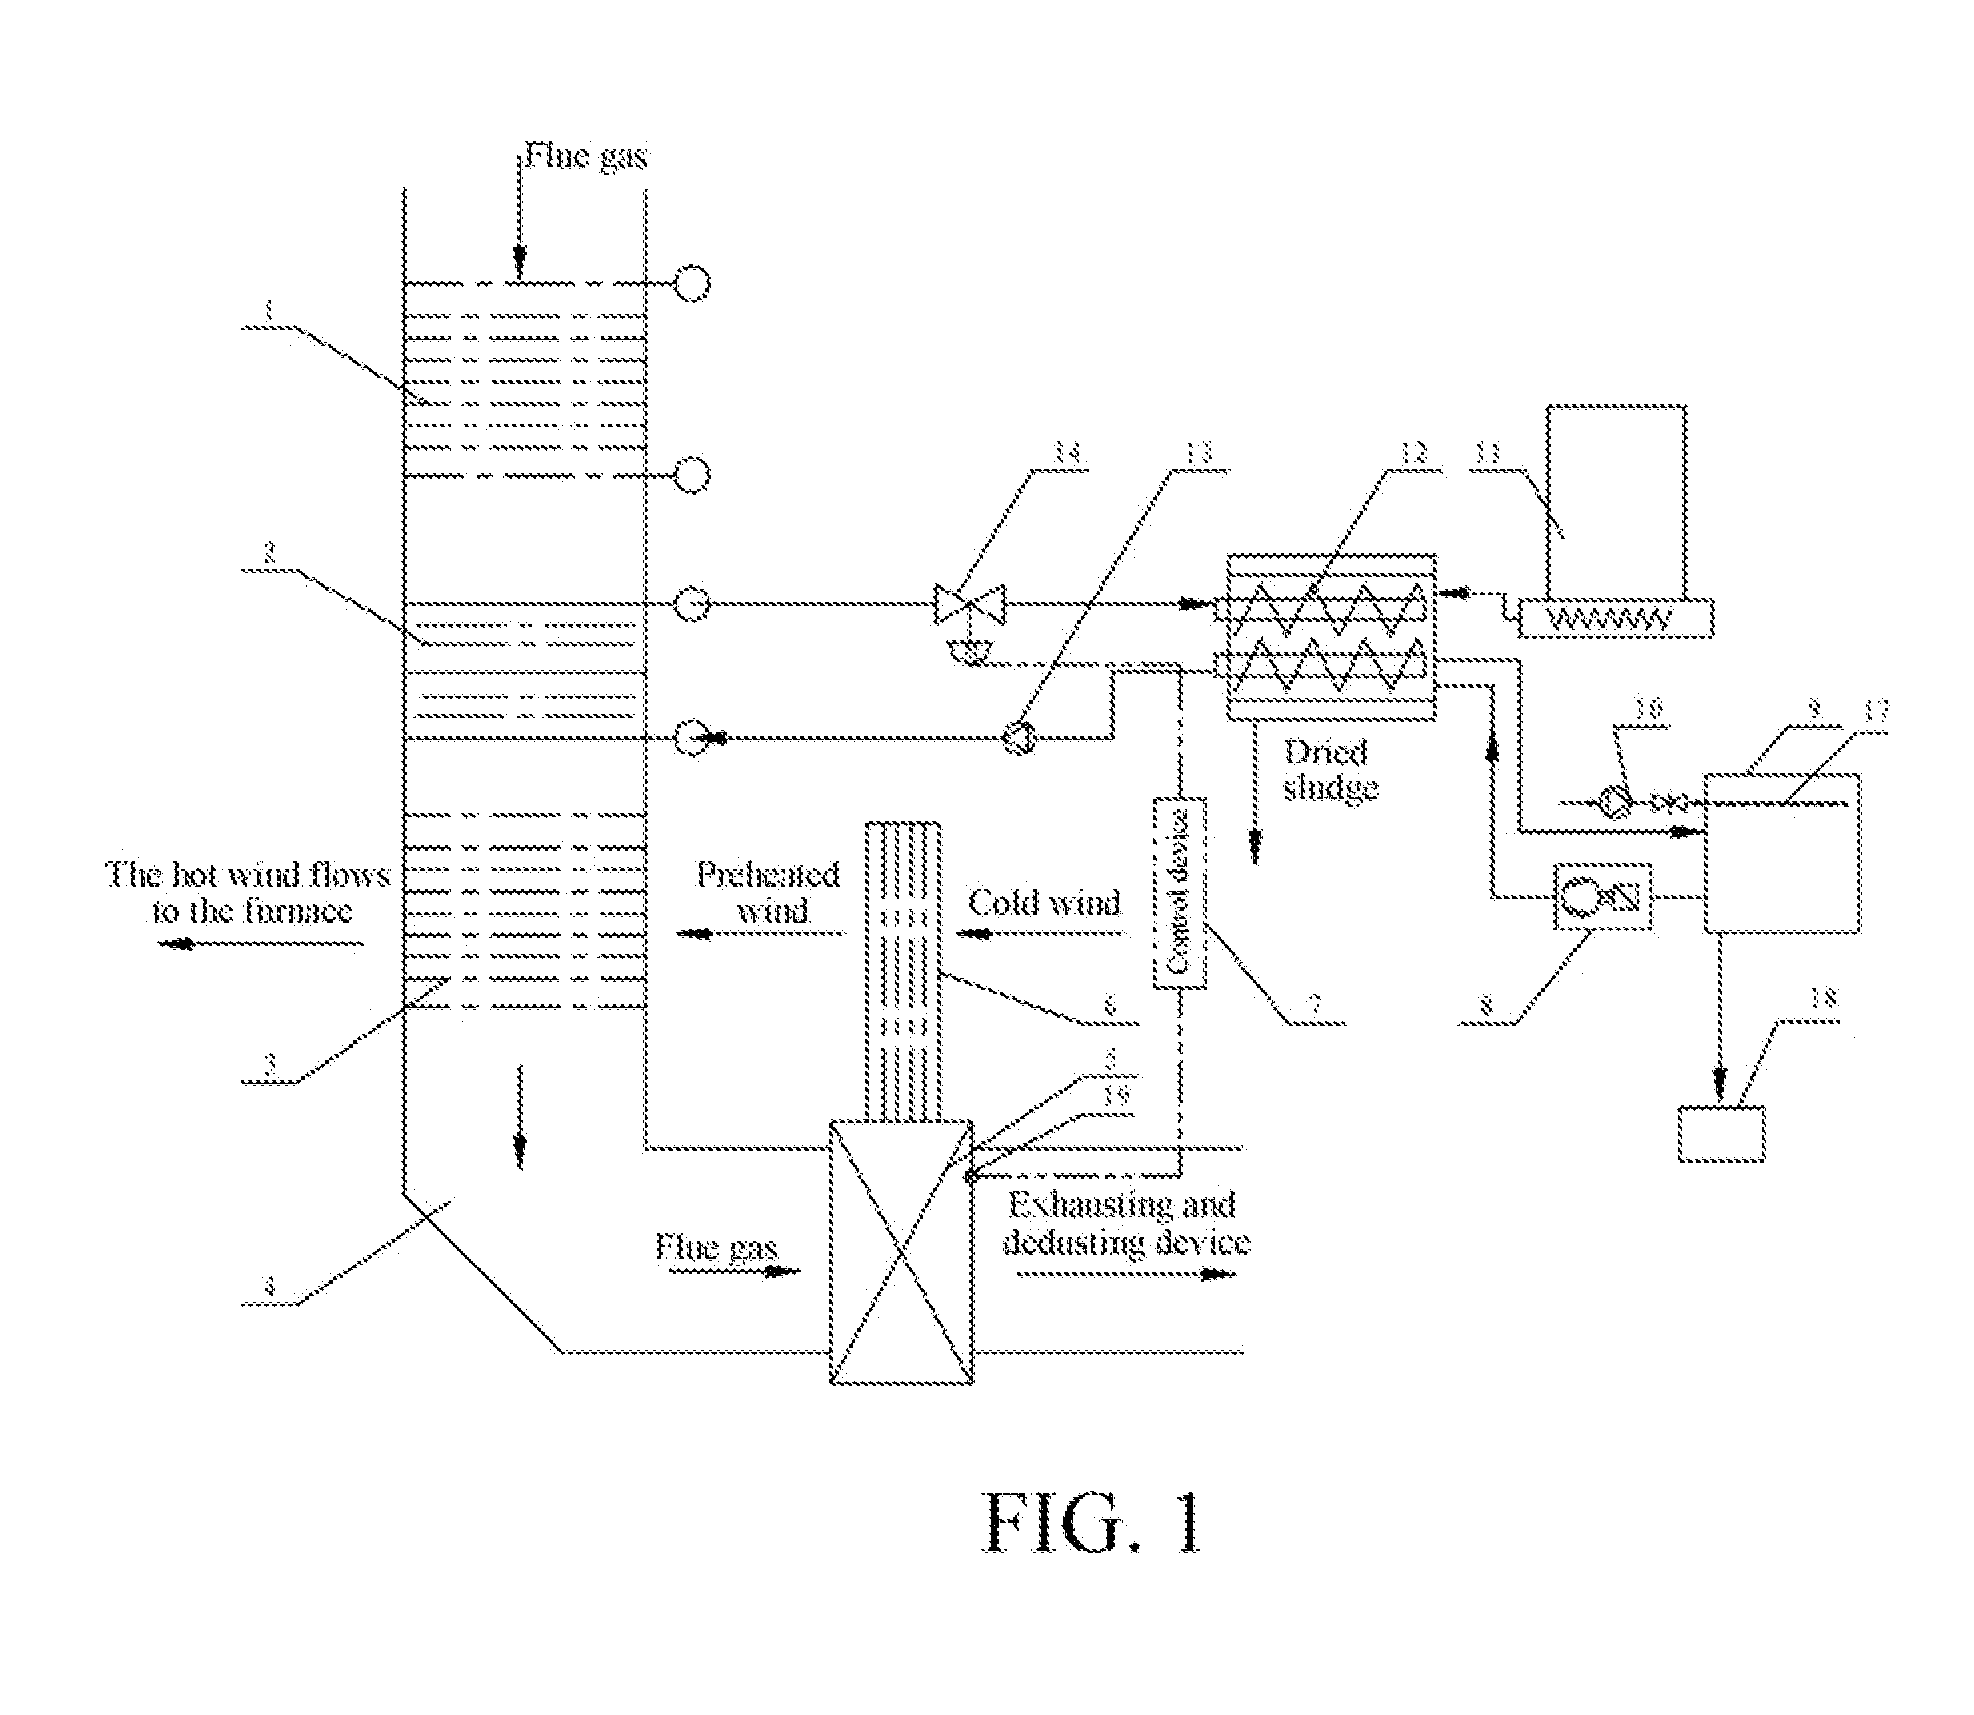 Non-contact Sludge Drying System With Flue Gas Heat